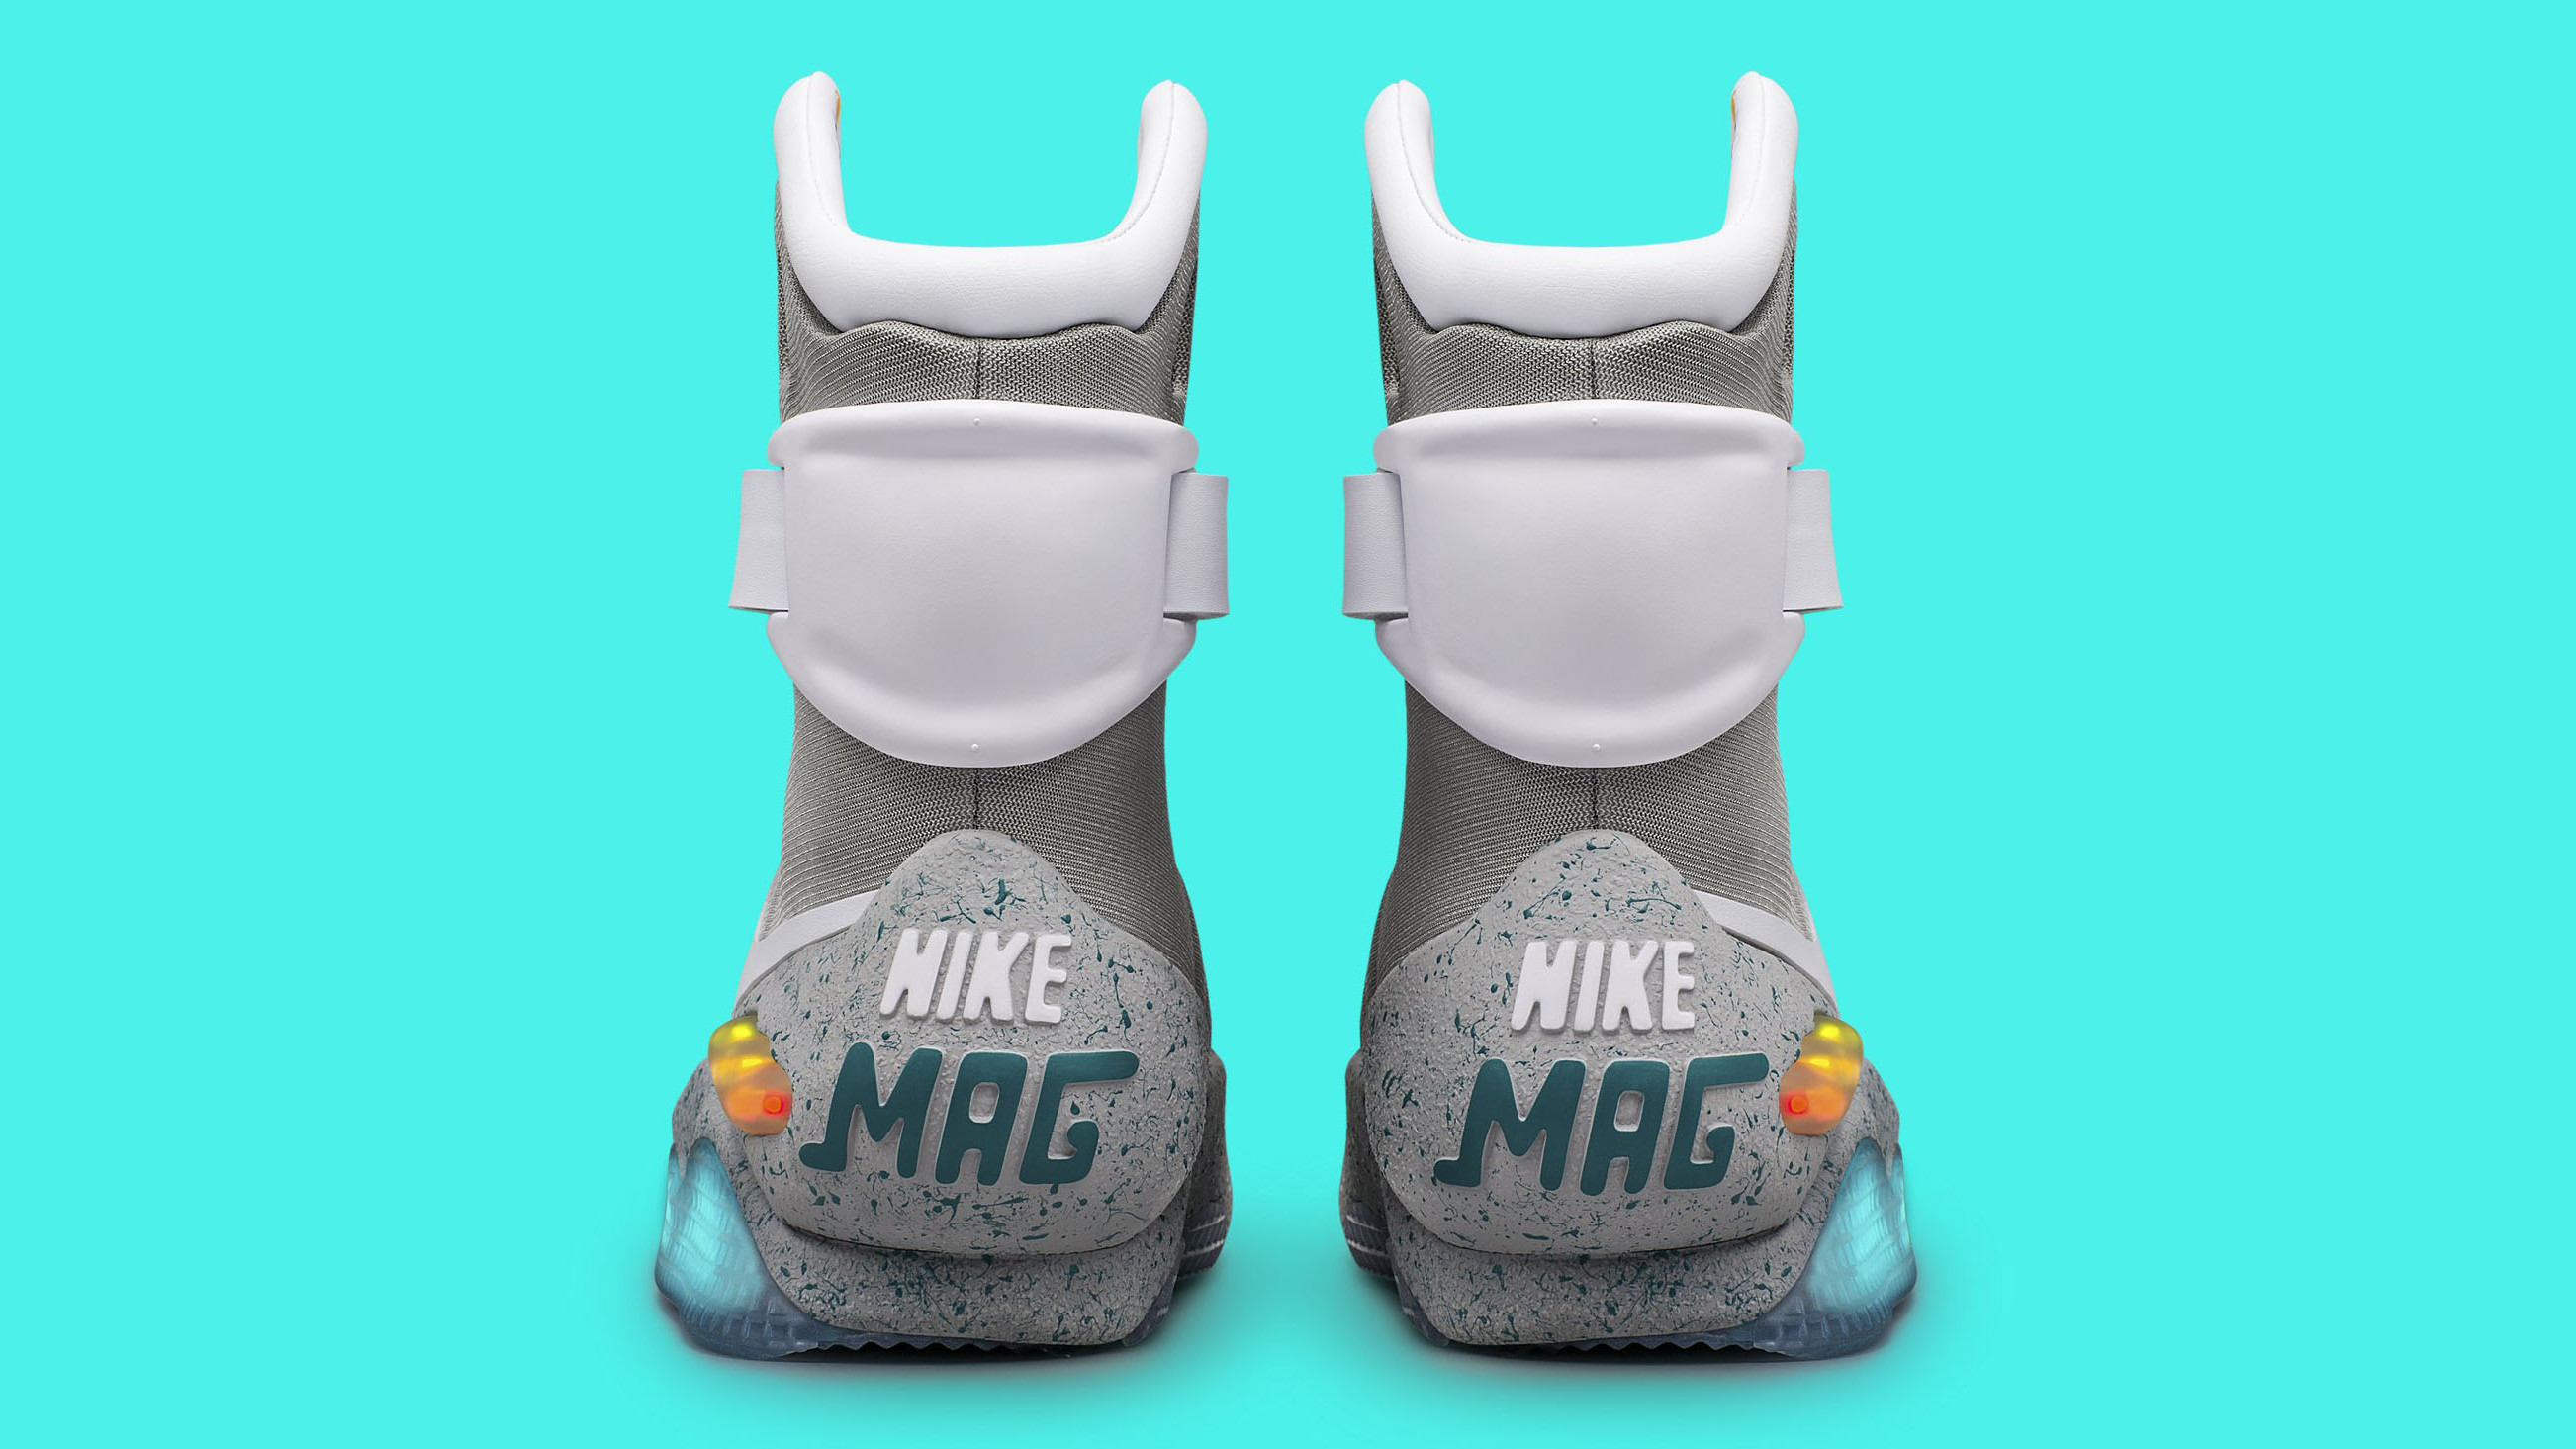 volumen correr Itaca How Much Are Nike Mag Back to the Future Sneakers | Sole Collector